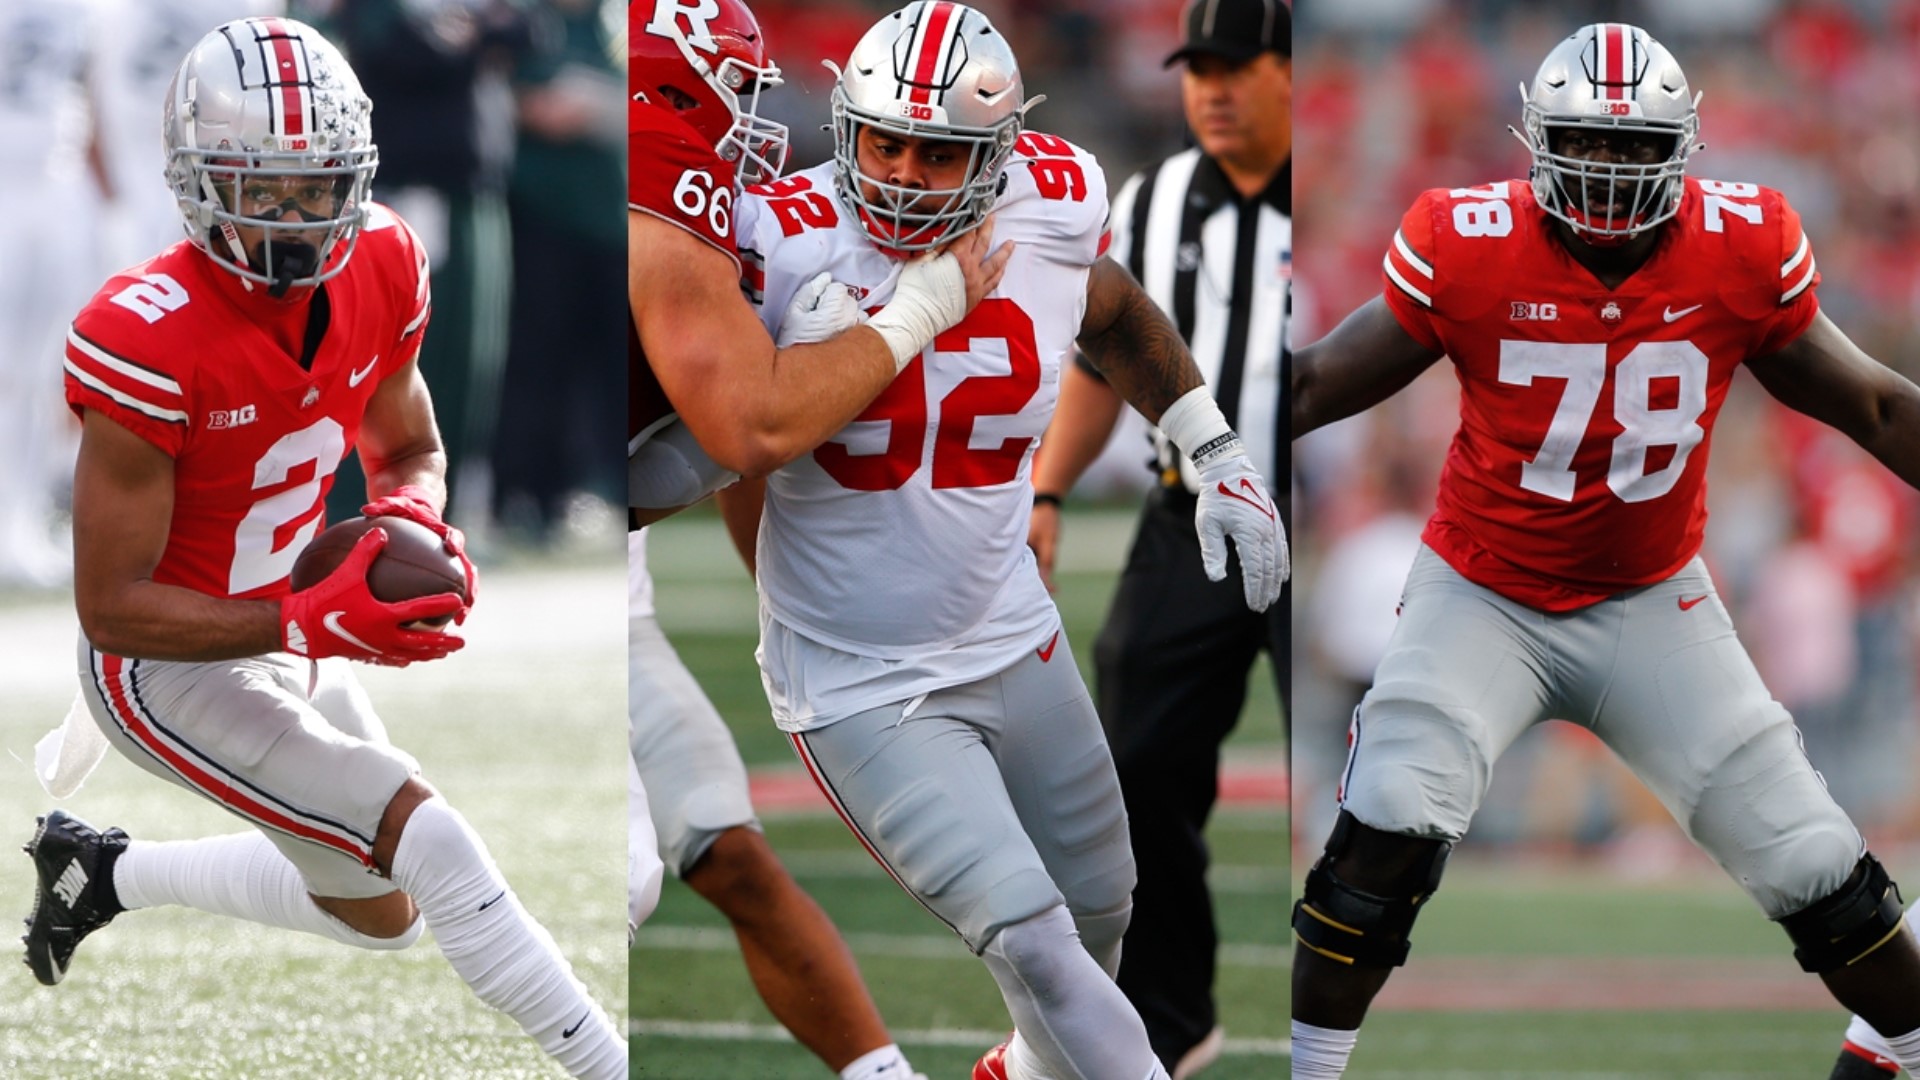 Chris Olave, Haskell Garrett, Haskel Garrett and Nicholas Petit-Frere all opted out of the Rose Bowl on Monday.